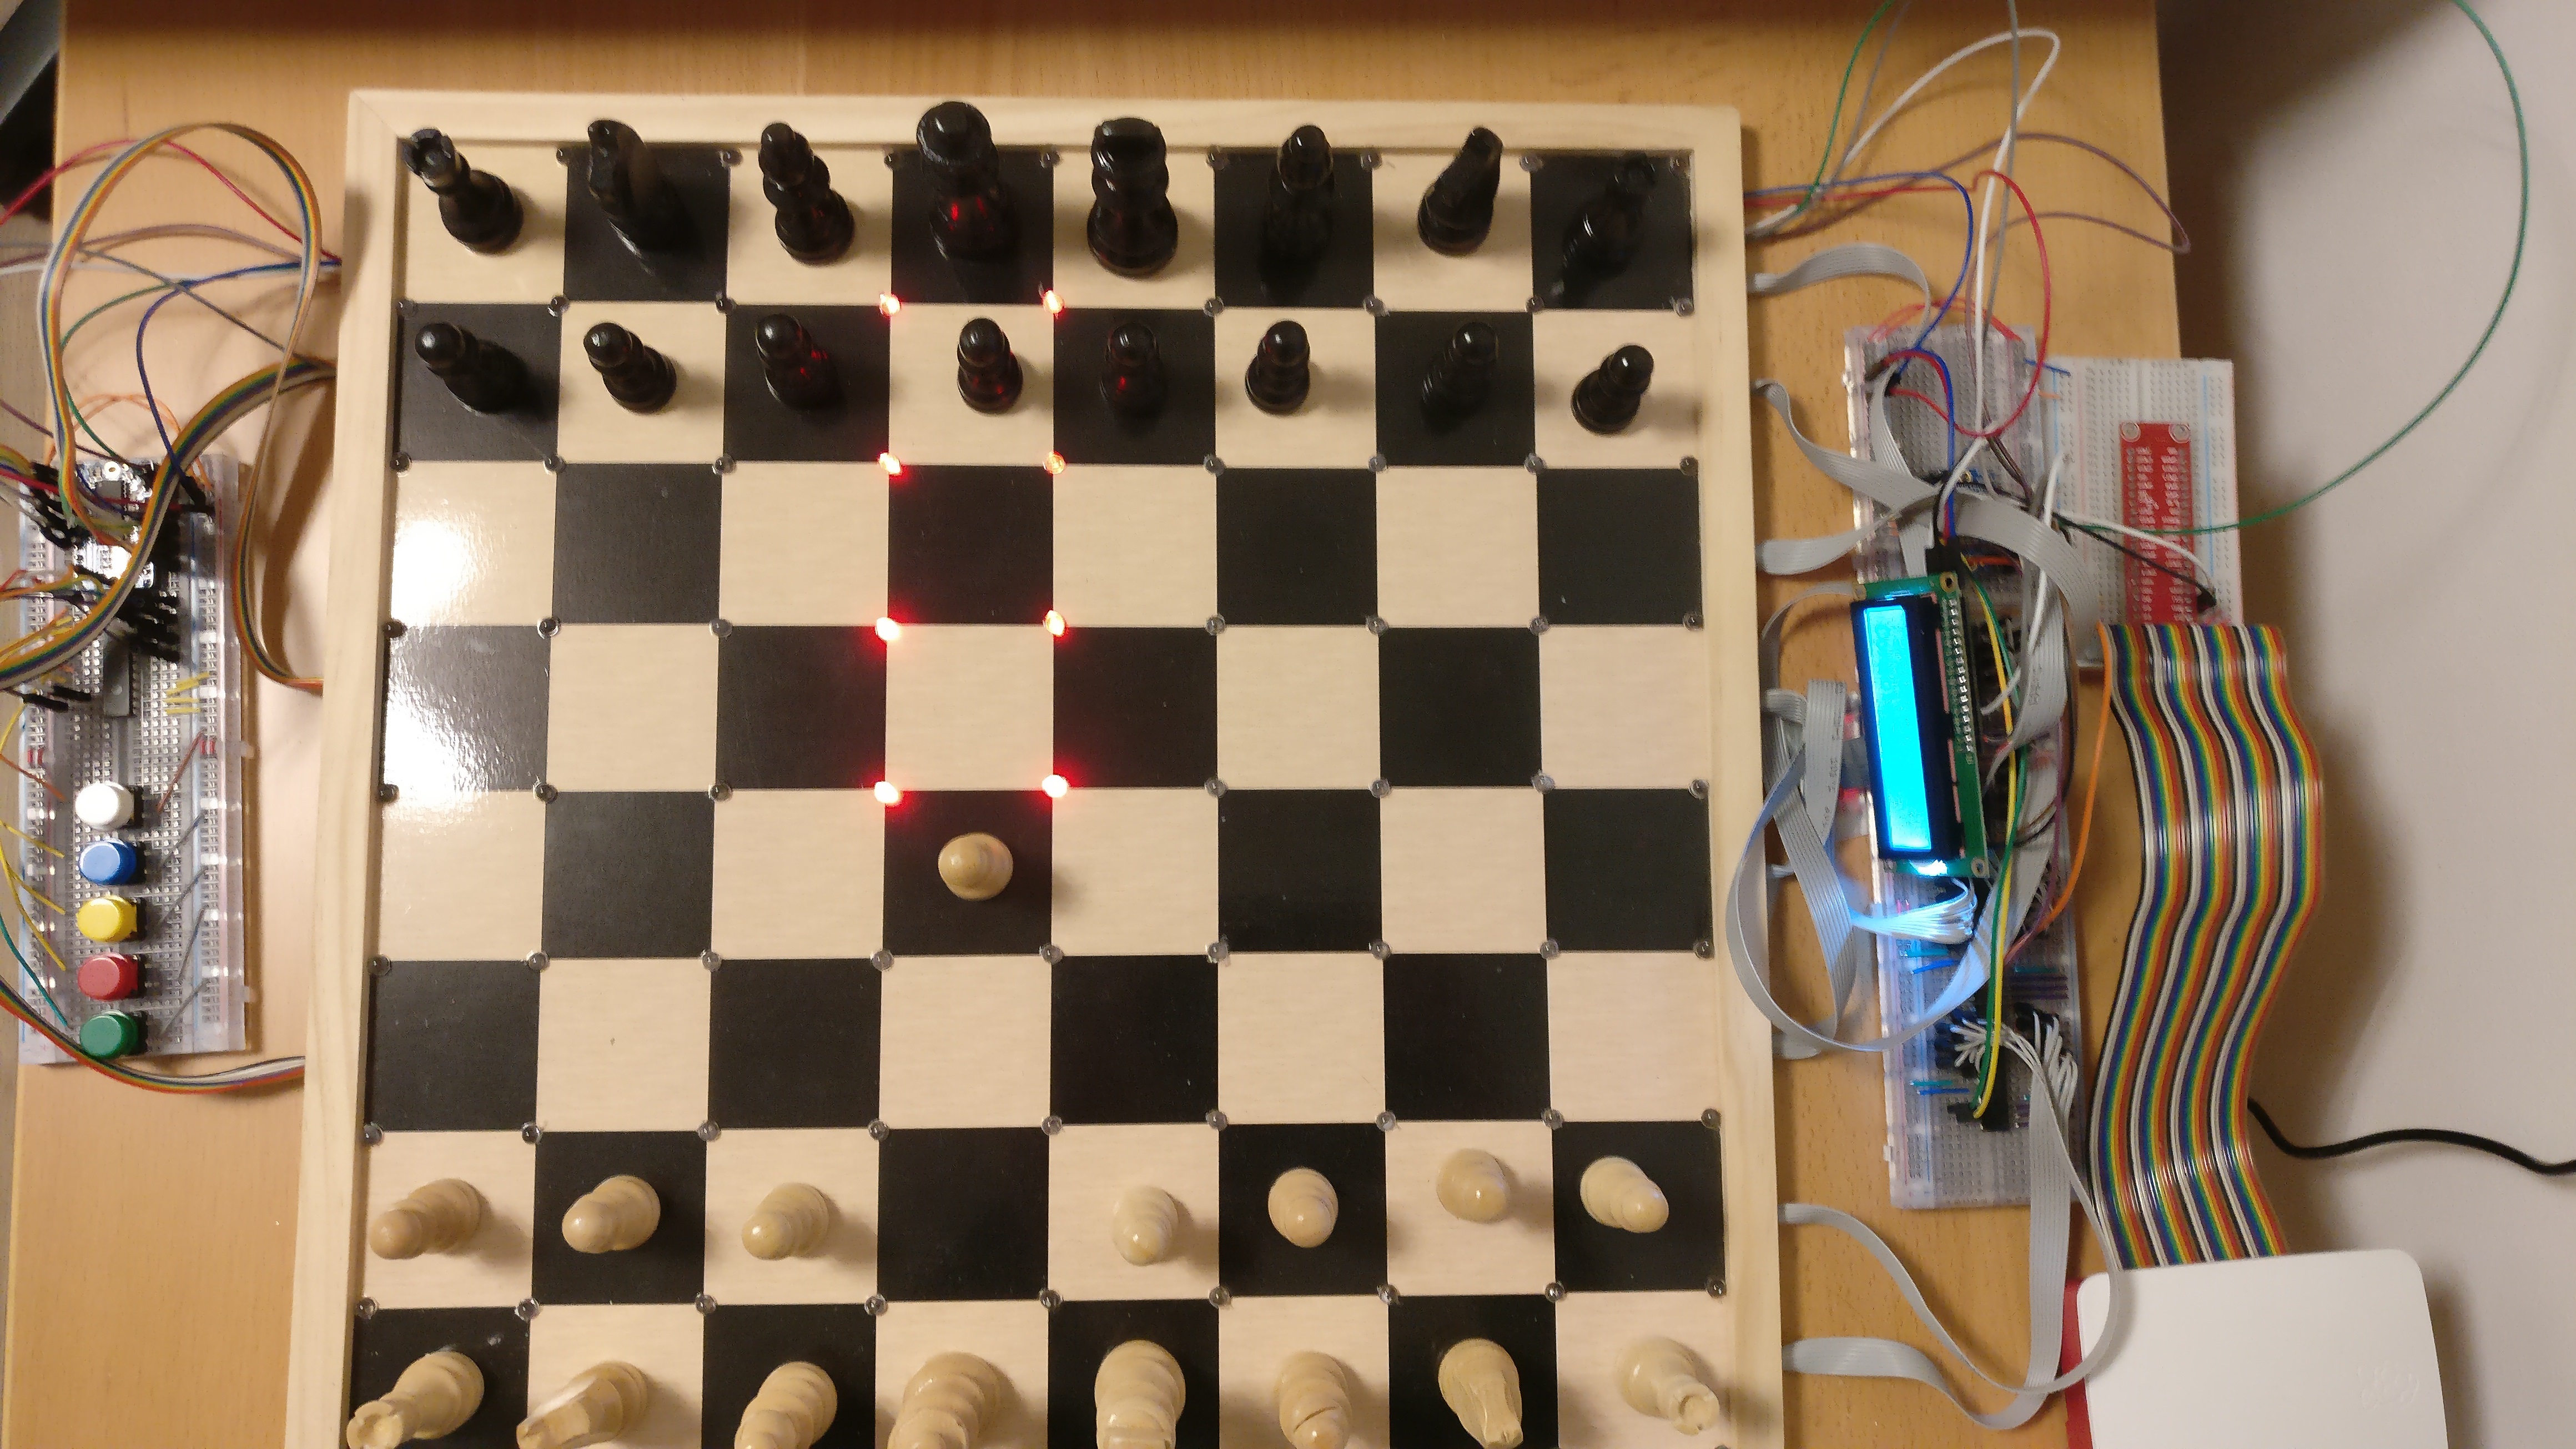 Arduino Smart Chess Board with LCD Display 